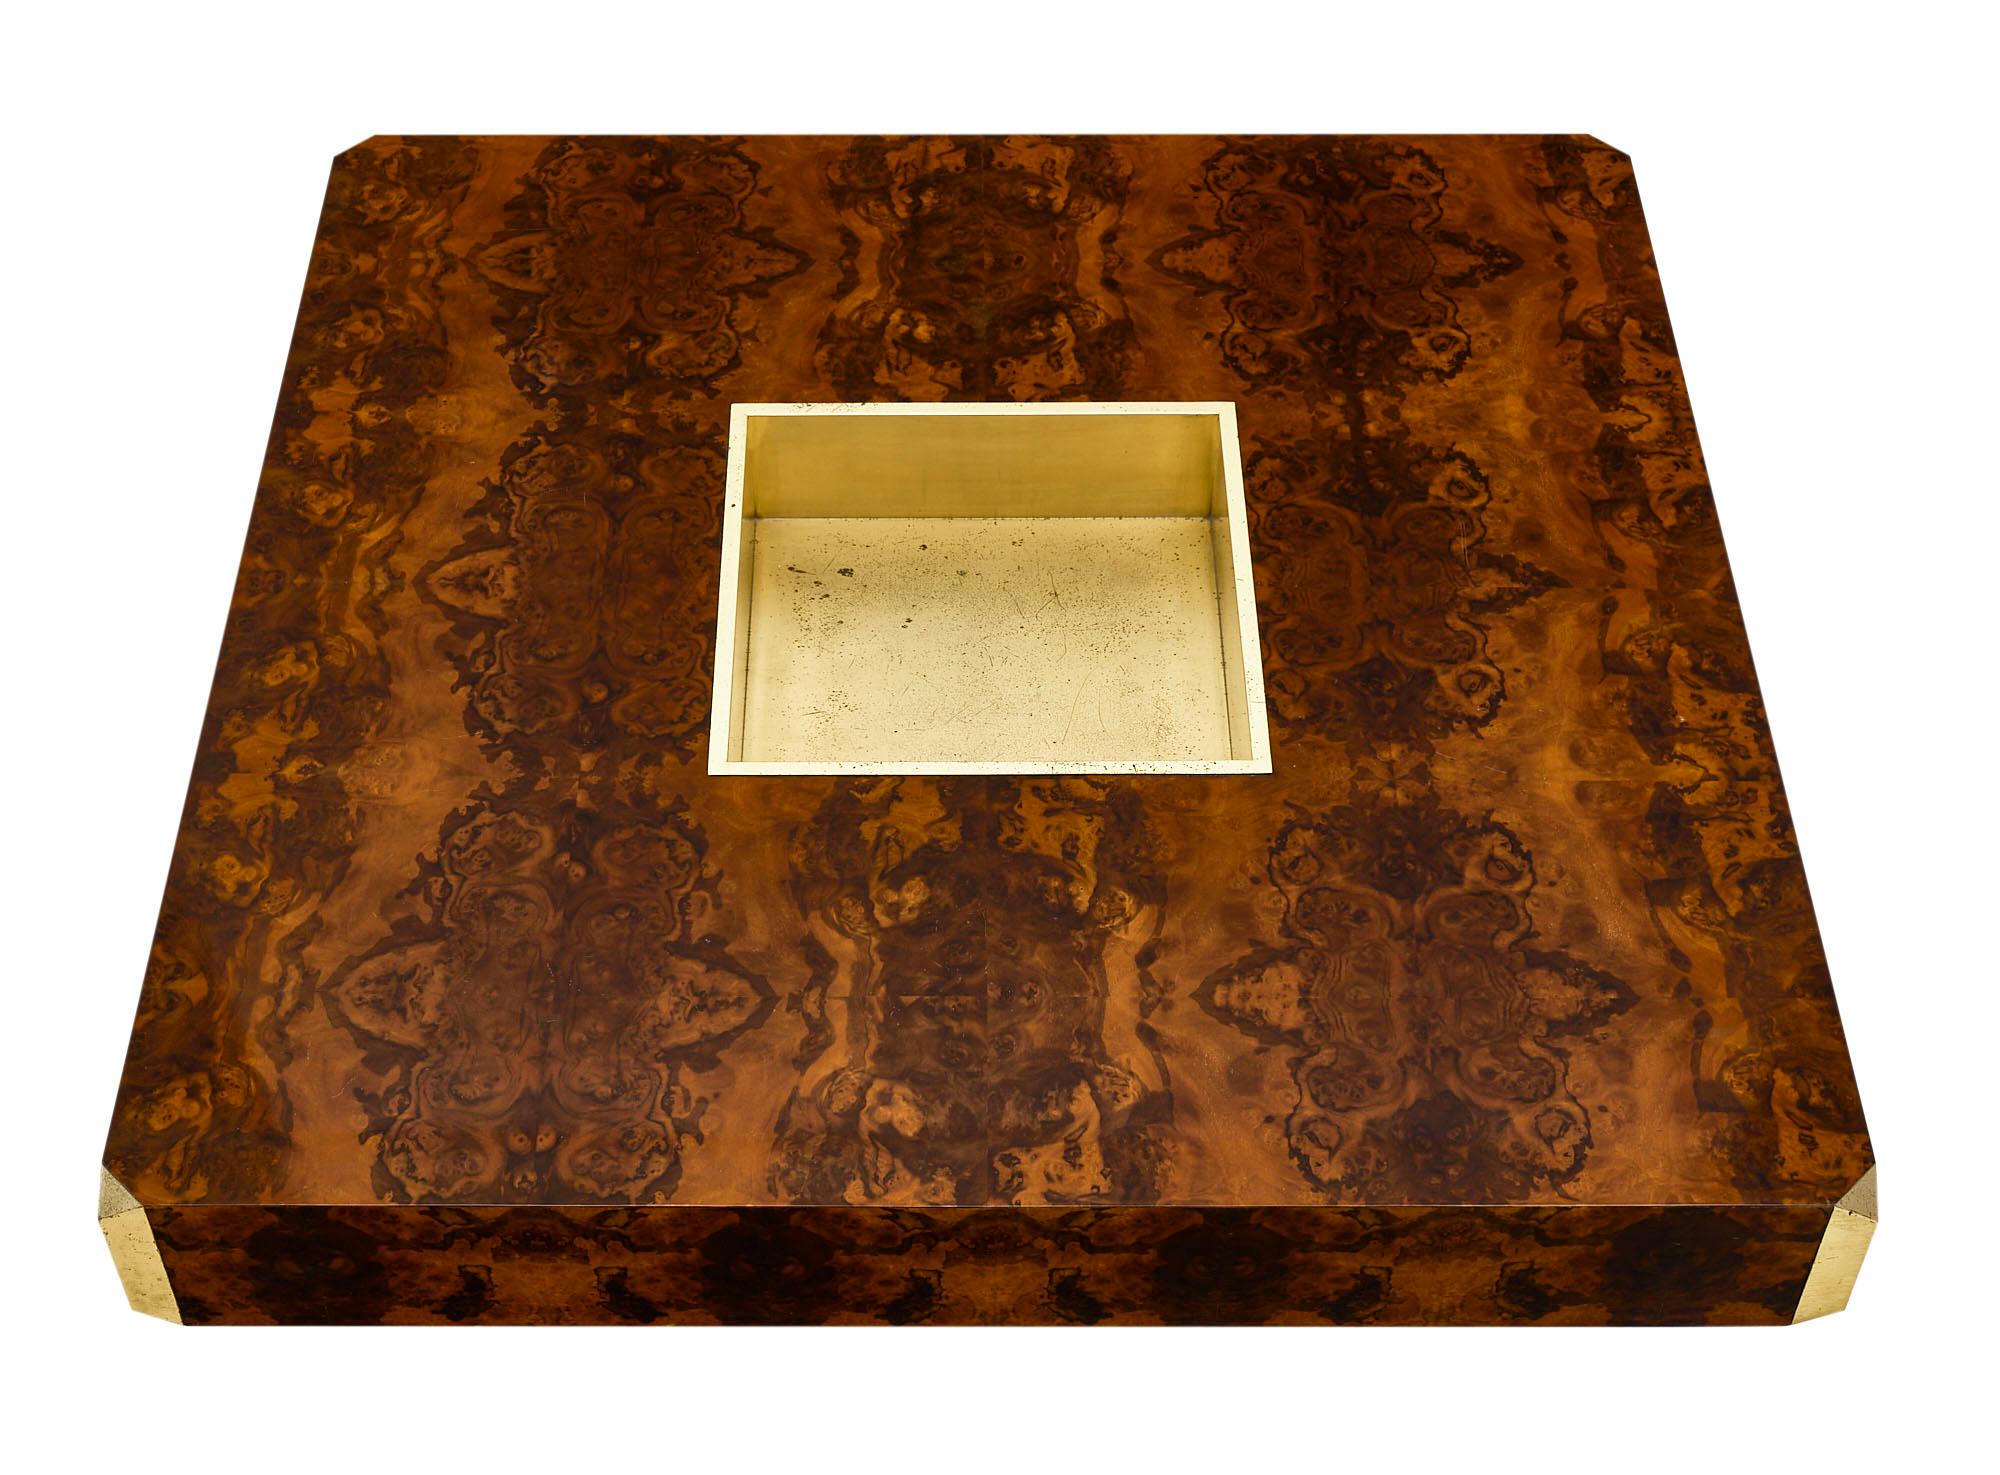 Square Willy Rizzo coffee table with burled walnut veneer and a lustrous French polish finish. The central brass compartment was designed originally to hold bottles. The table is adorned with brass corners as well. This piece is in excellent